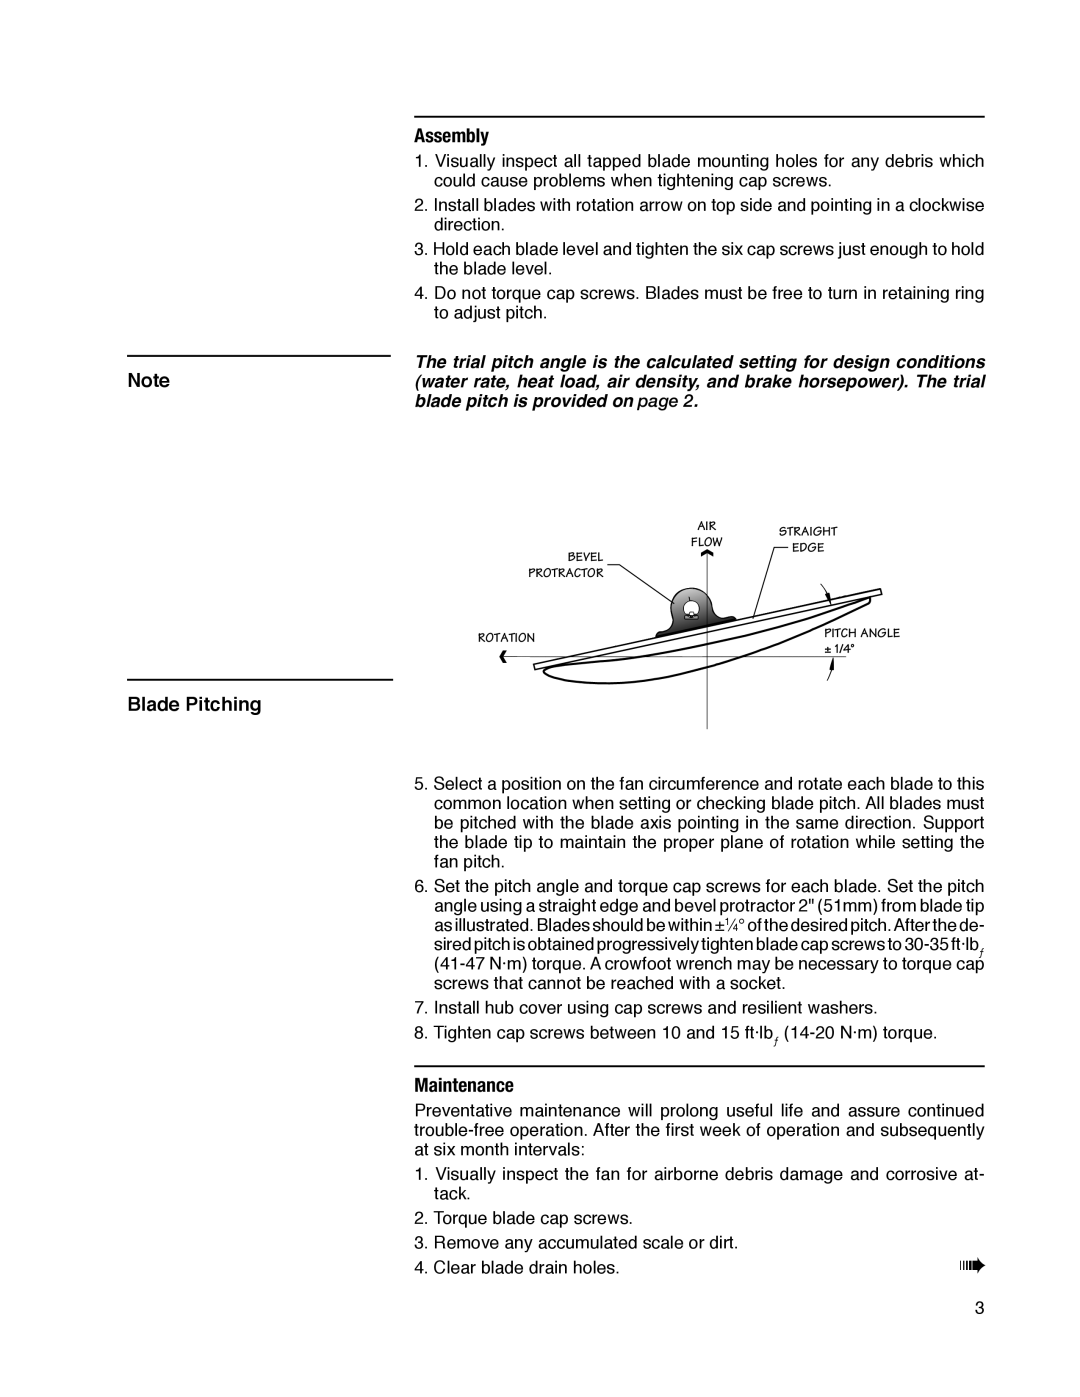 SPX Cooling Technologies HP7I user manual Assembly, Blade Pitching, Maintenance 